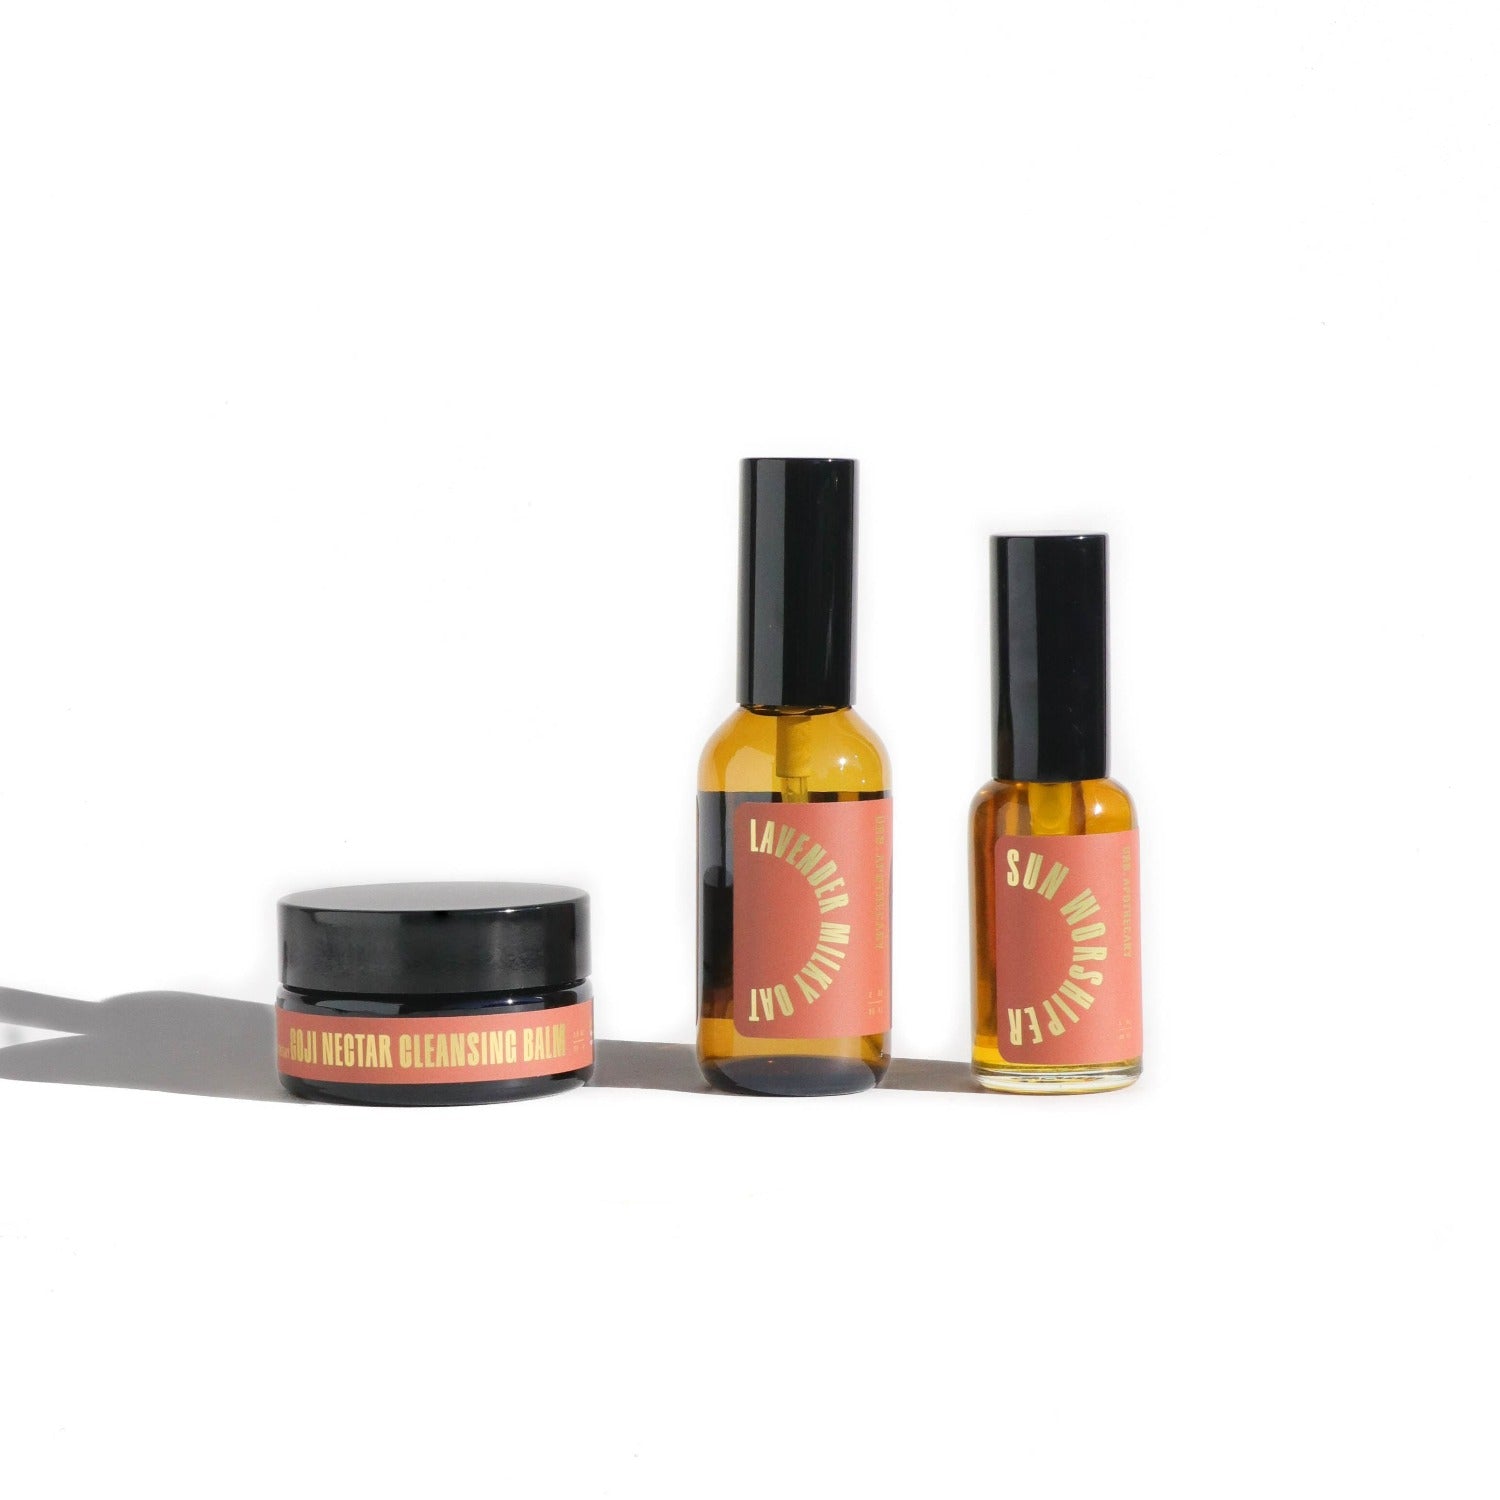 DAILY CLEANSING KIT WITH GOJI NECTAR CLEANSING BALM